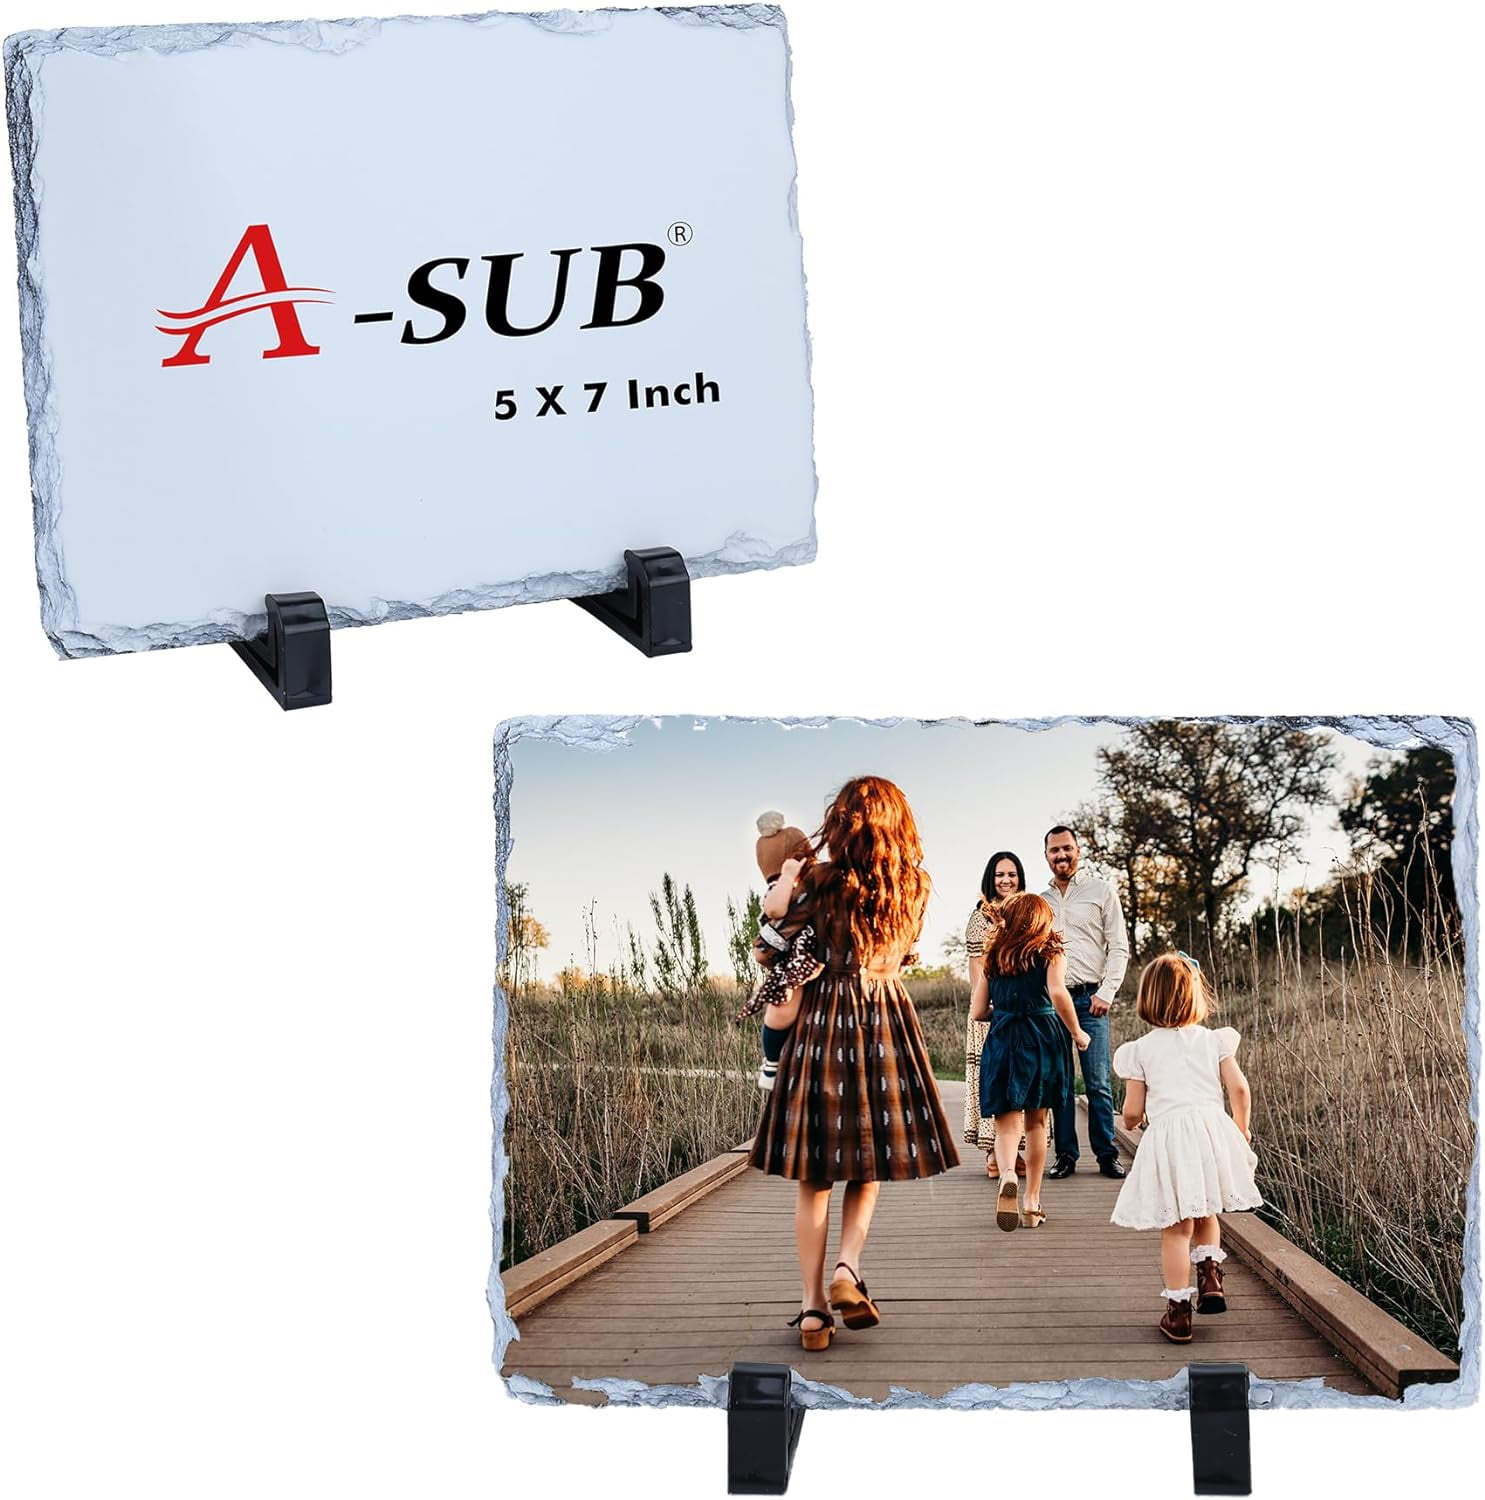 MR.R Sublimation Blank Rectangular Rock Slate Photo Plaque Thin Black  Picture Frames, Customized Photo Frame Novelty For Wedding,Birthday,Baby  Birth,5.9x7.88 Inch From Allanhu, $6.17